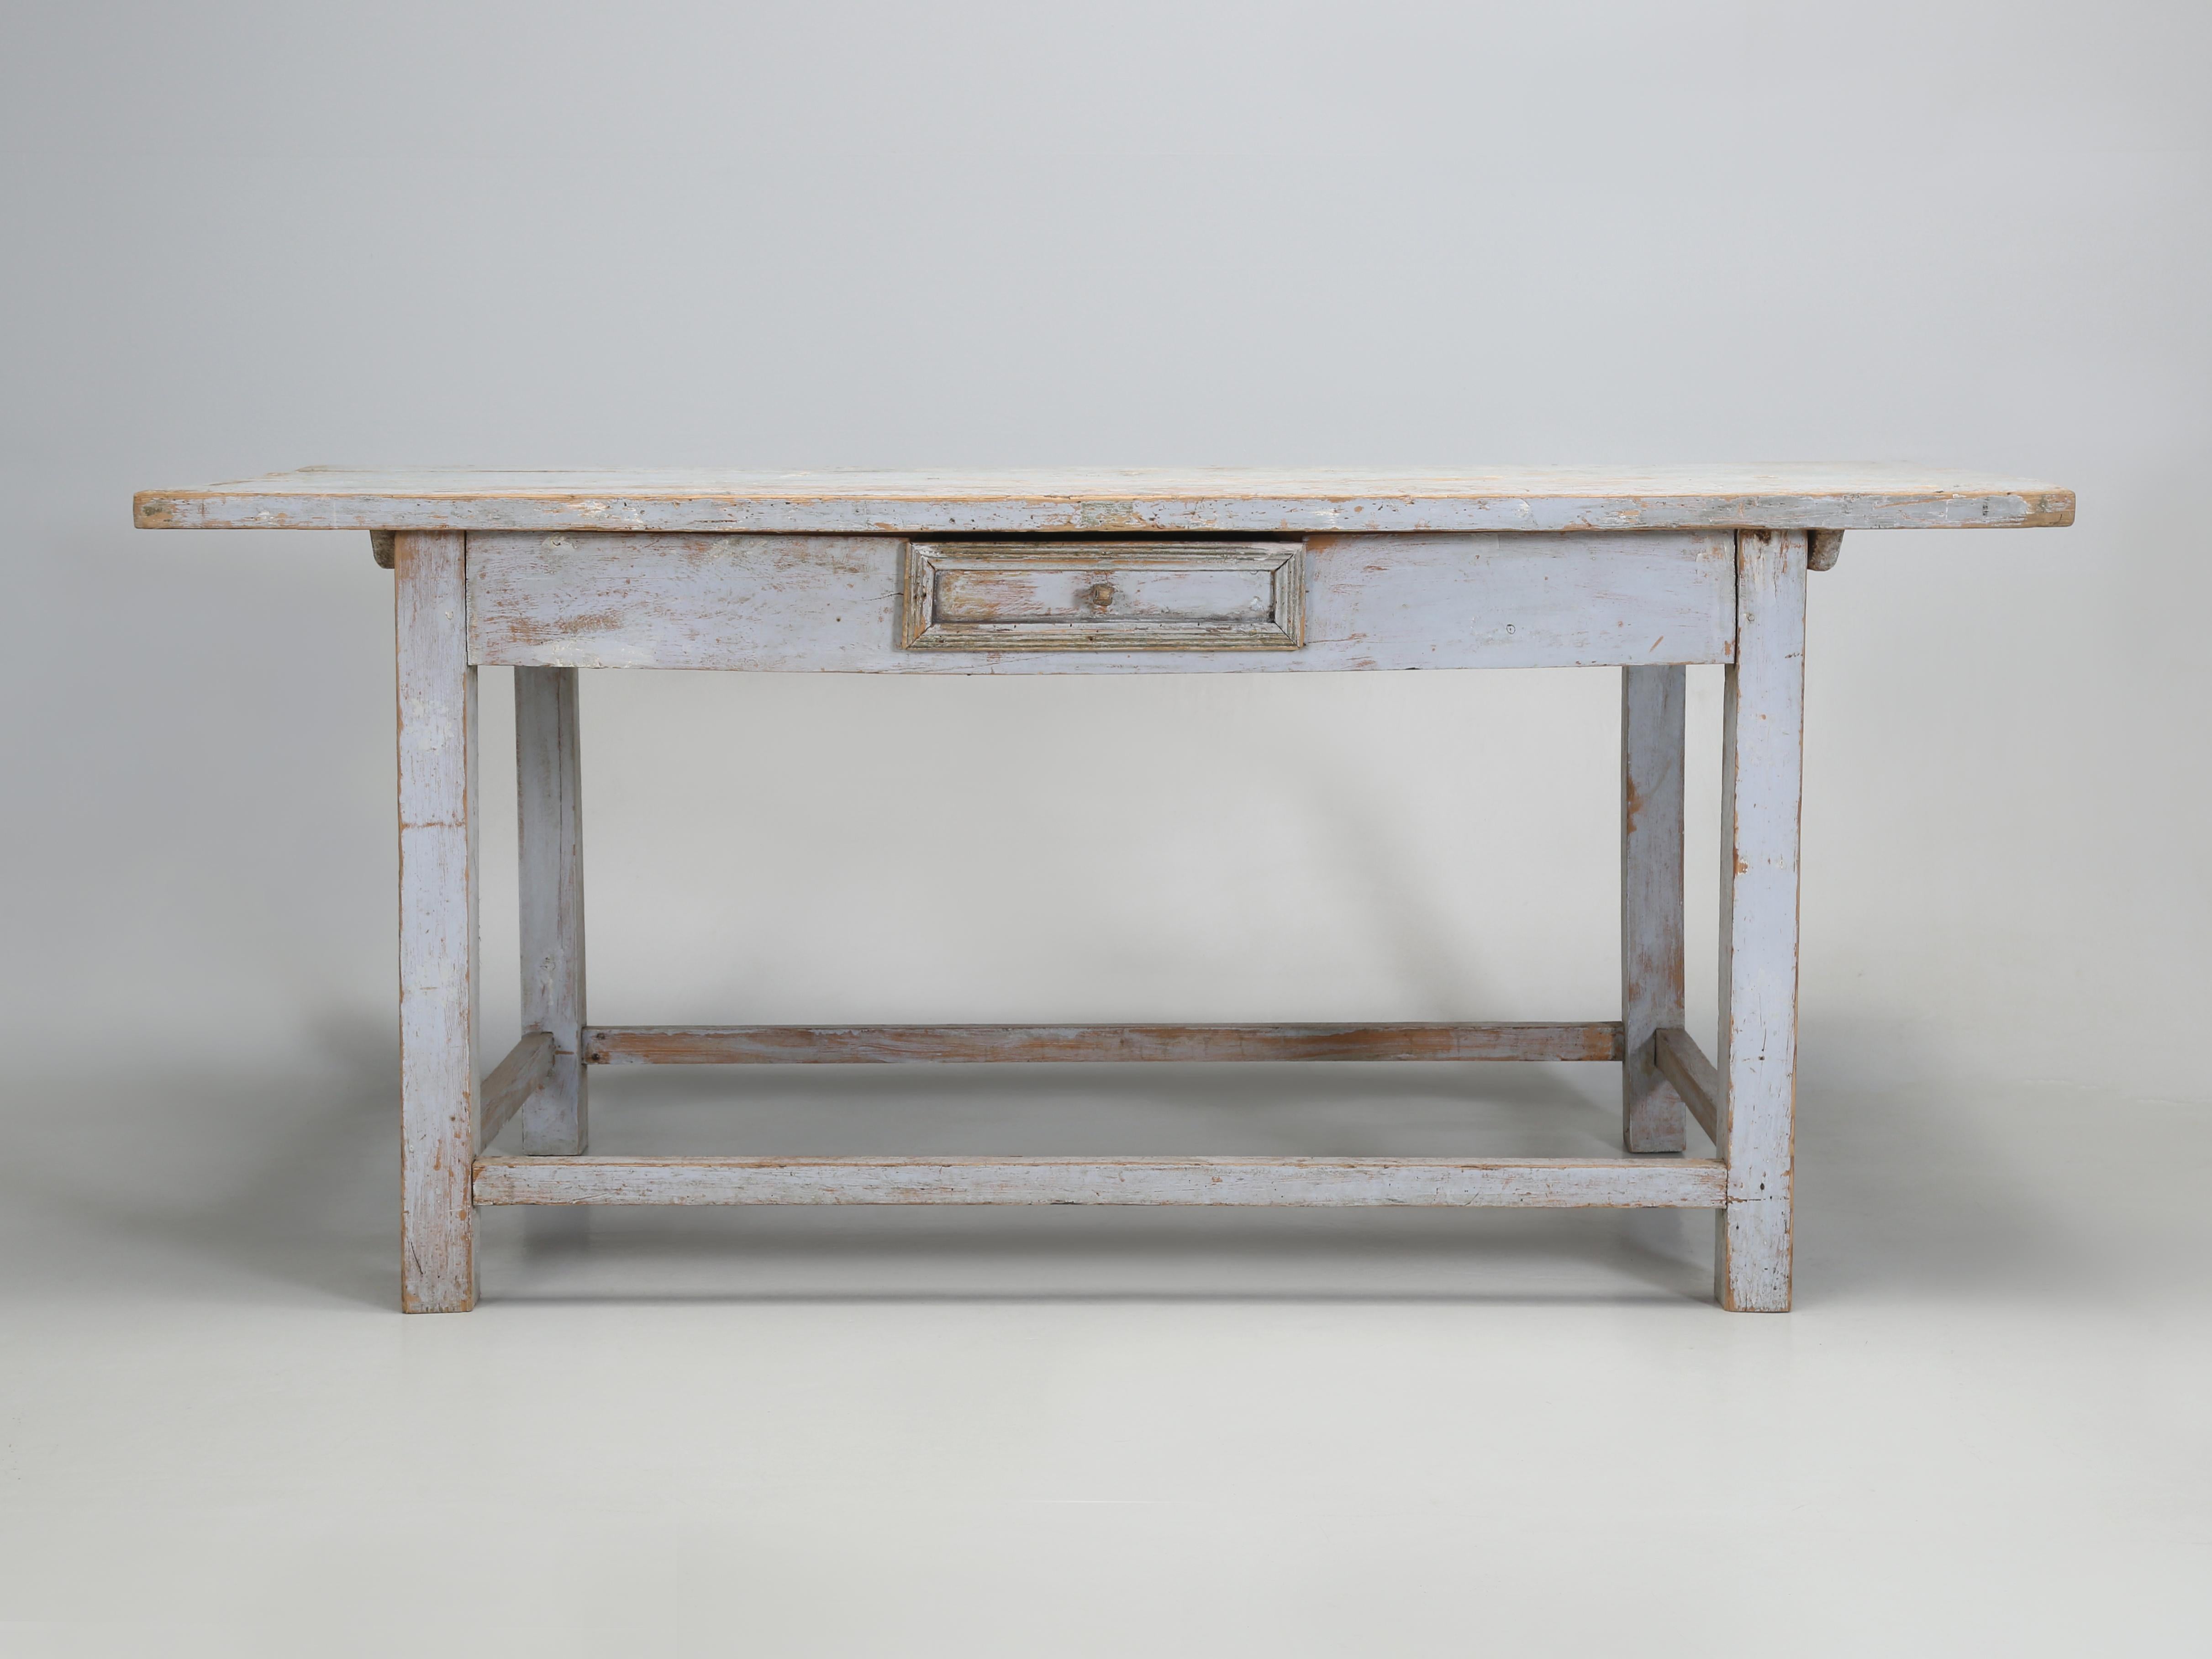 Wood Antique Swedish Painted Table That Would Make for a Great Looking Kitchen Island For Sale